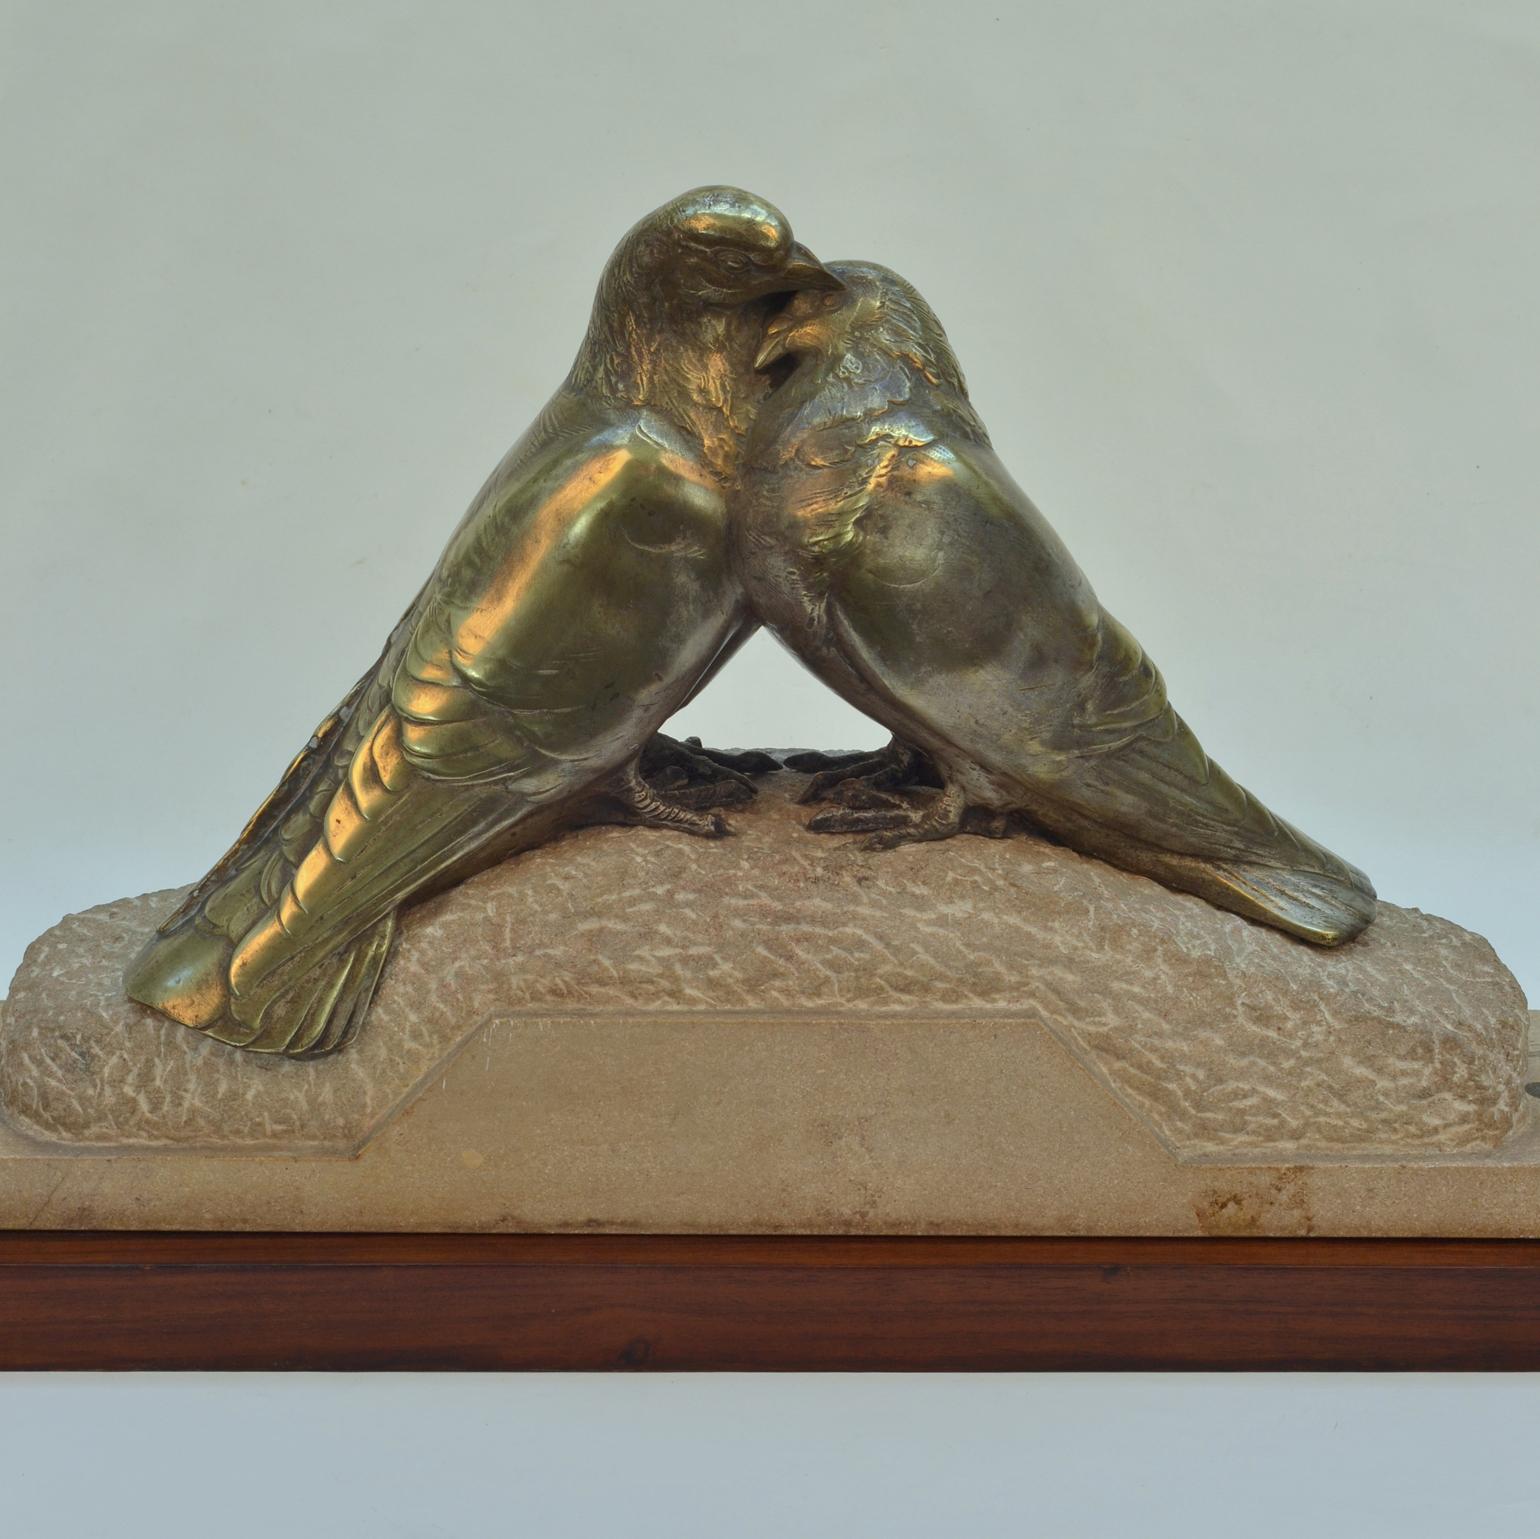 Colombes amourueses, air of embracing Doves was sculpted by Pierre Alexandre Morlon. These remarkable carved birds are nuzzling perched on a carved marble stone base which sits on a mahogany wooden plinth. The bronze is part silvered. The Doves